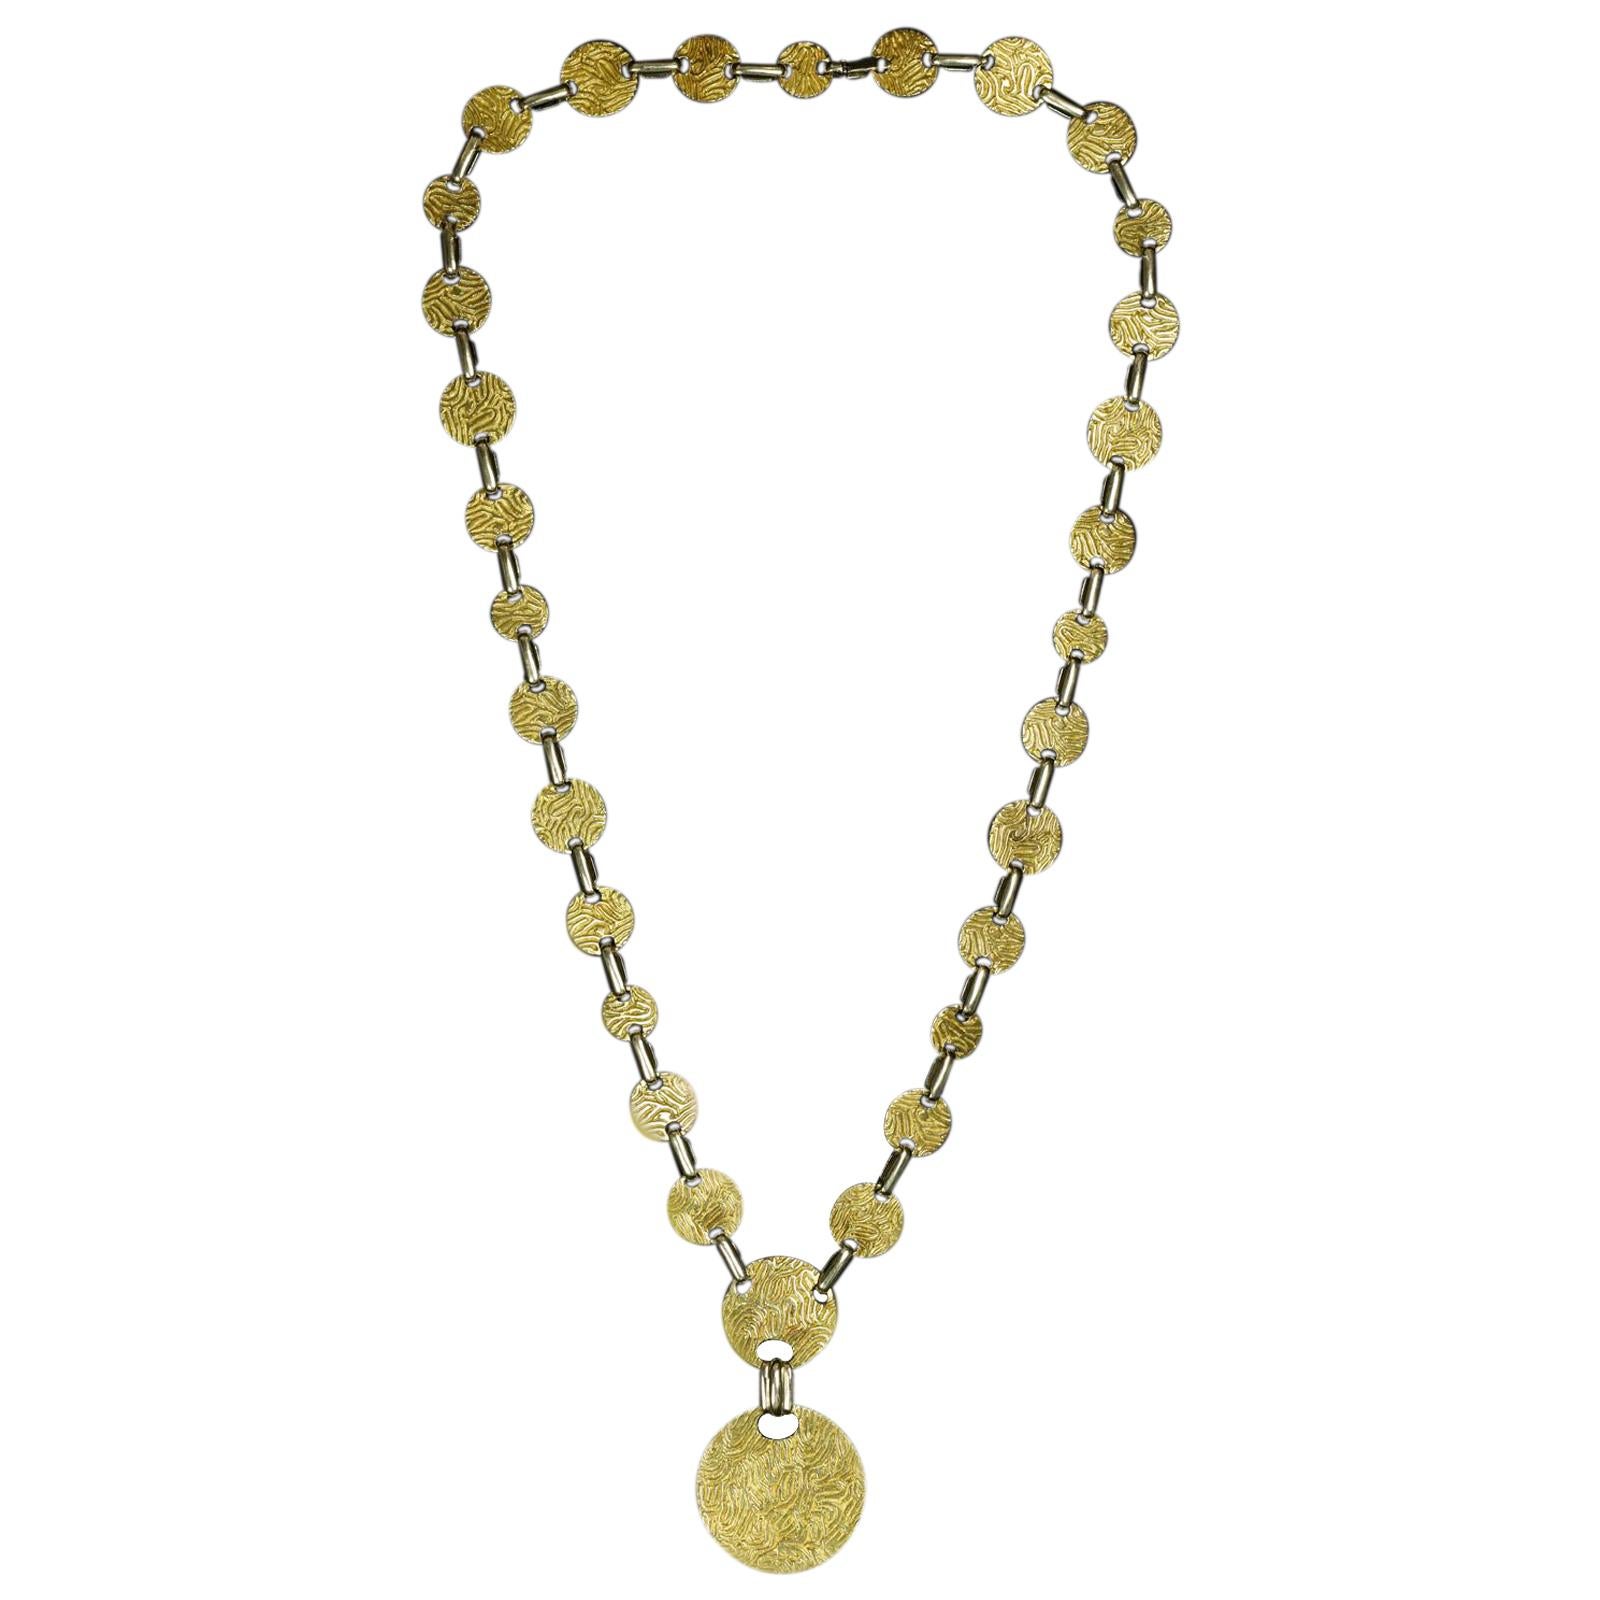 Bold Gold Long Sautoir Necklace with Patterned Discs by Cartier, circa 1960s